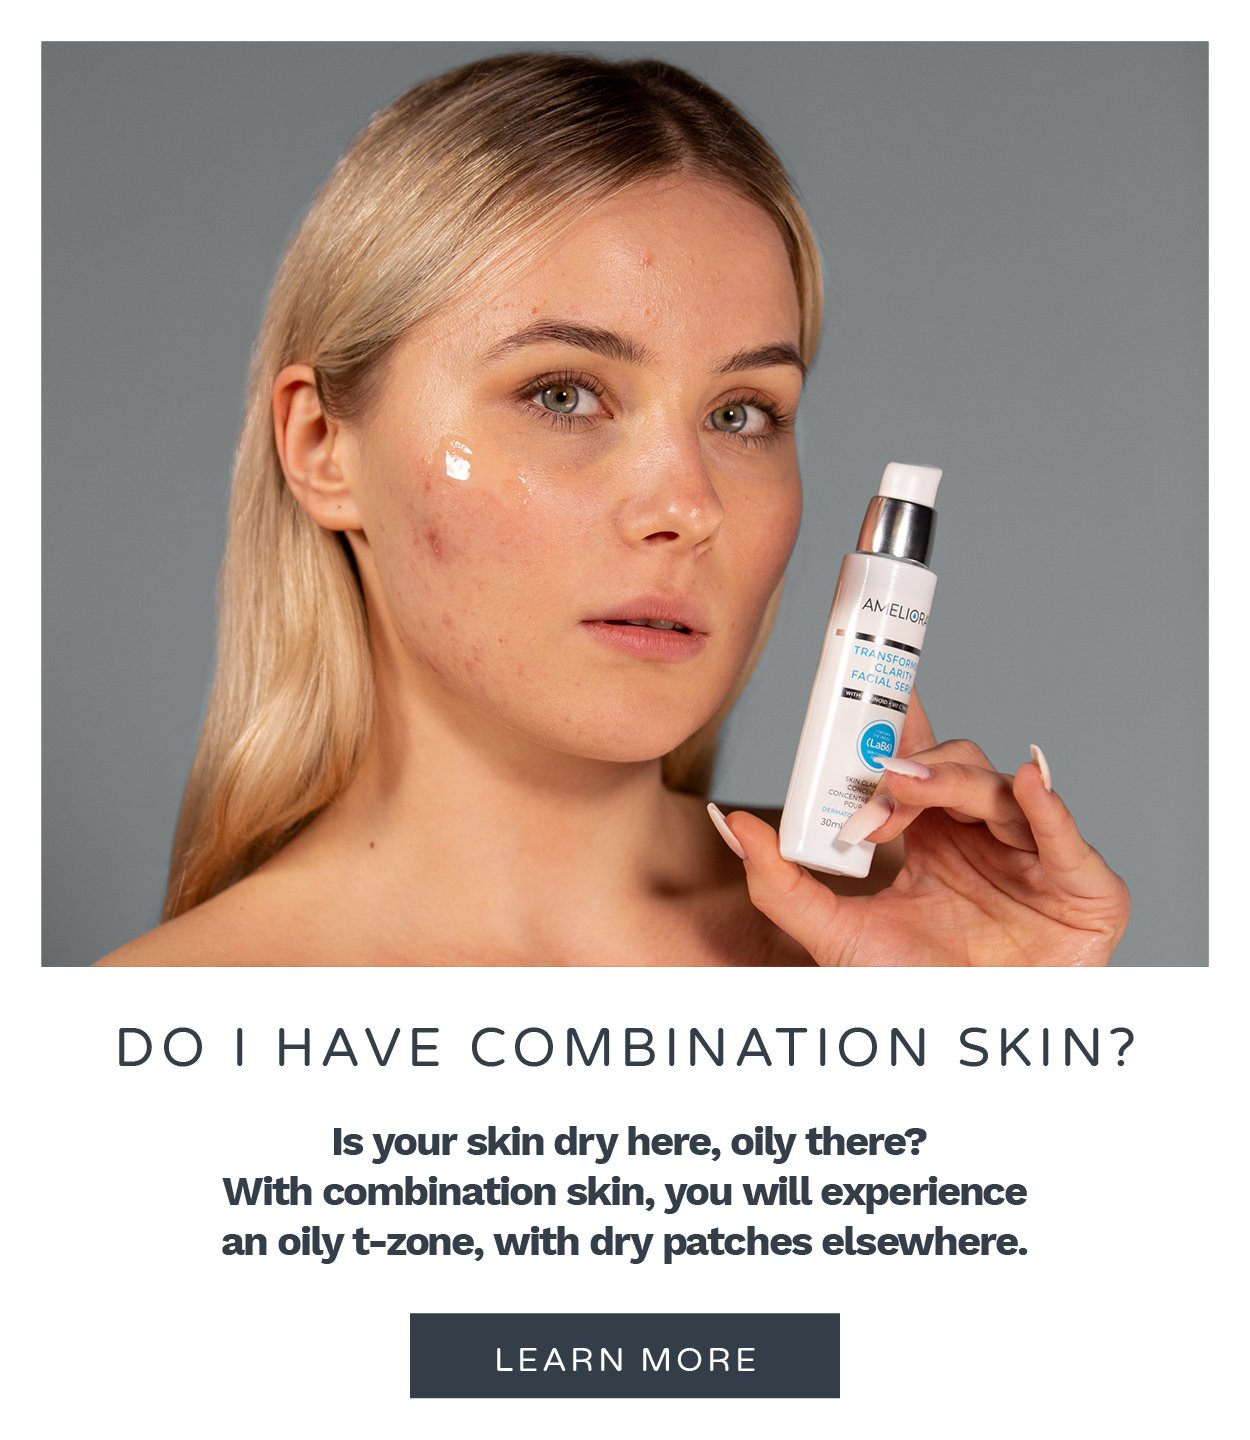 Learn more about combination skin